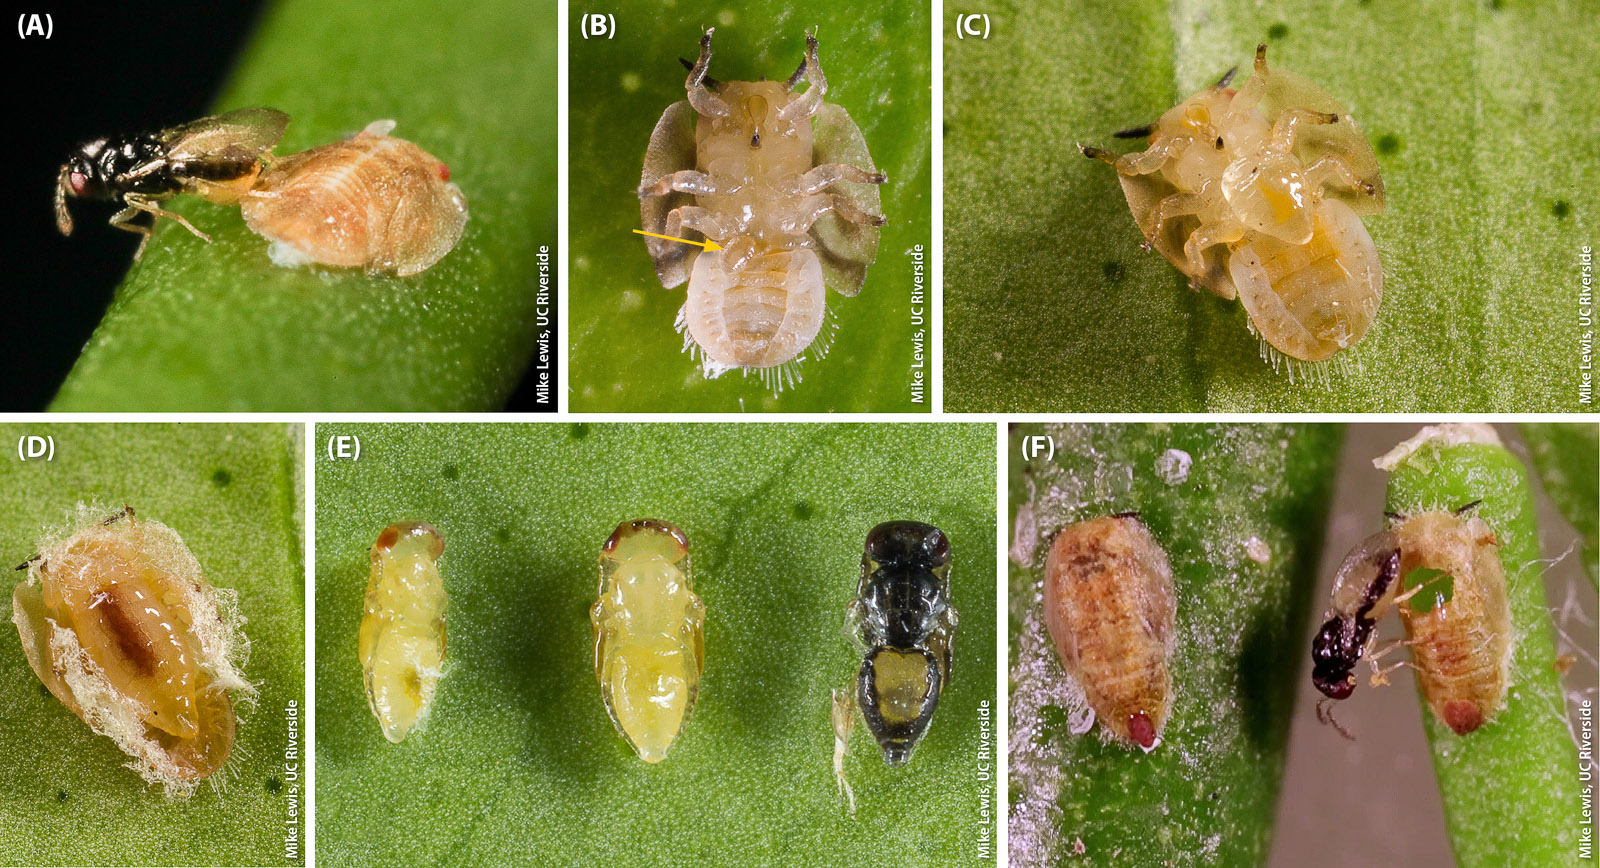 Tamarixia radiata developmental biology: (A) female laying an egg underneath a psyllid nymph, (B) parasitoid egg (arrow) attached to its host, (C, D) T. radiata nymph feeding externally on its host, (E) developing T. radiata pupae removed from ACP mummies and (F) an adult T. radiata that has emerged from the anterior region (circular exit hole) of the ACP mummy. T. radiata has established widely in Southern California since releases began in late 2011.